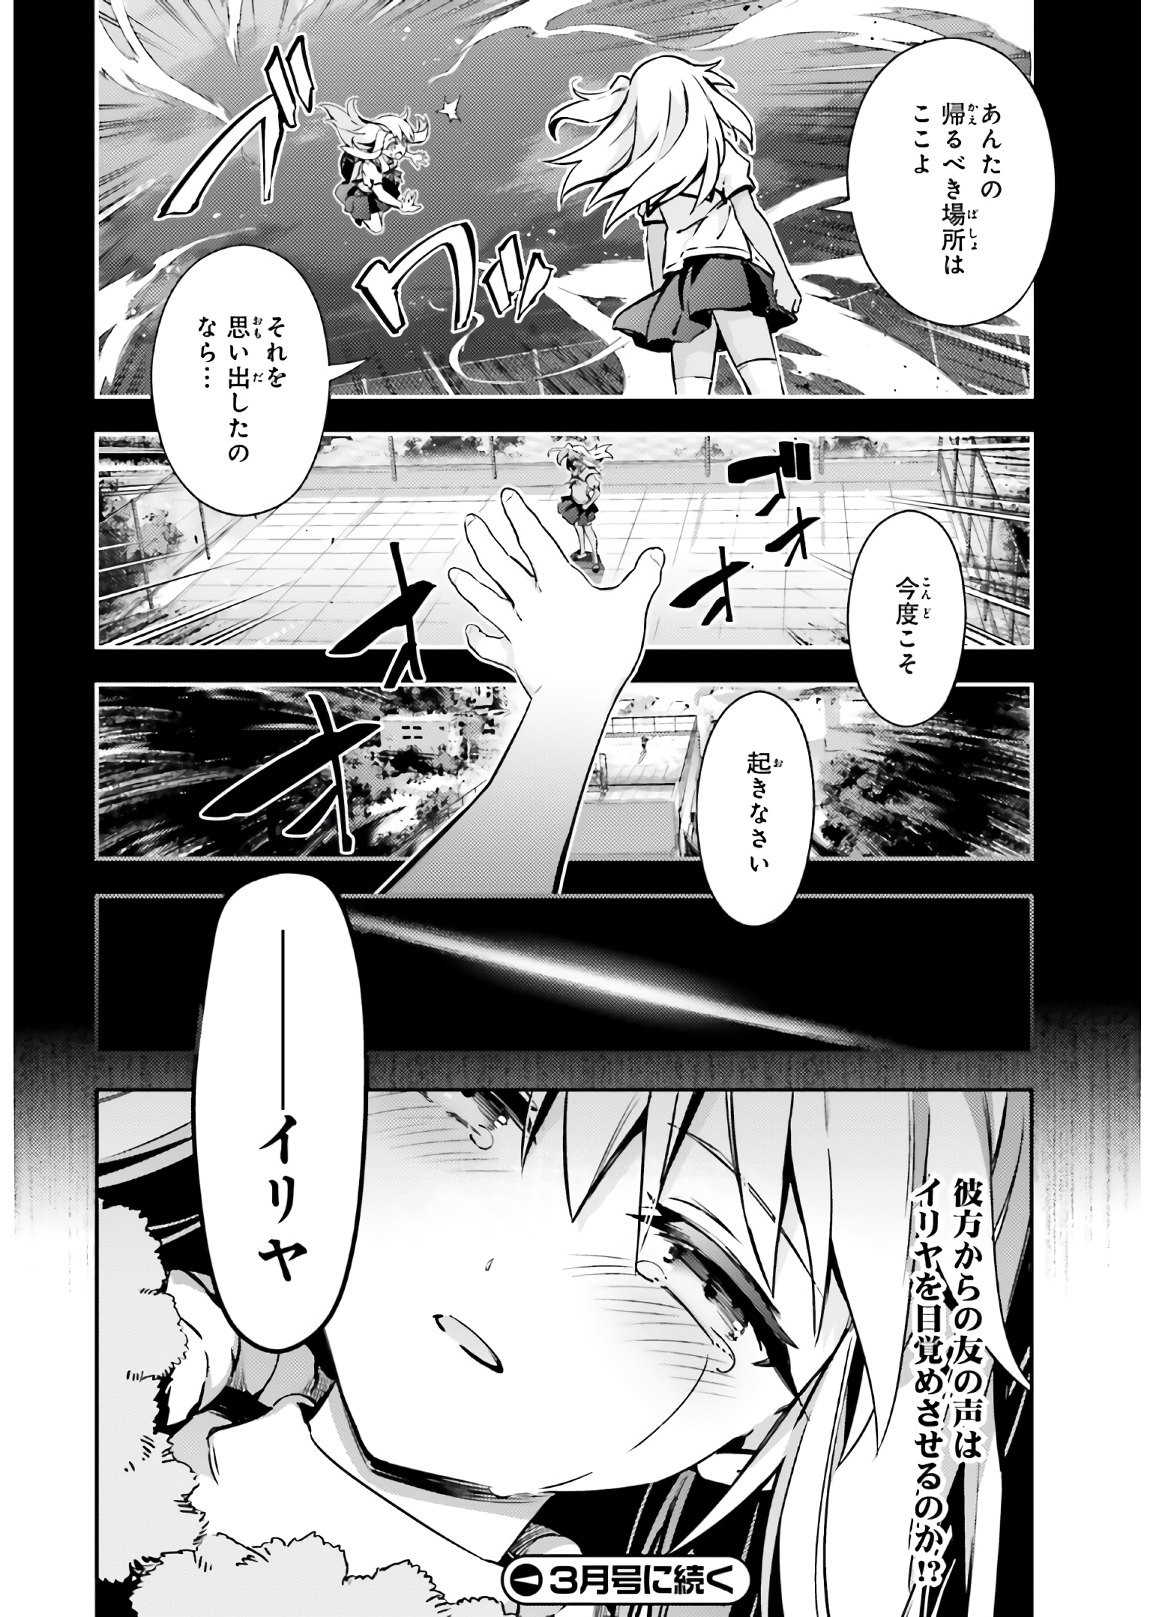 Fate/Kaleid Liner Prisma Illya Drei! - Chapter 61 - Page 22